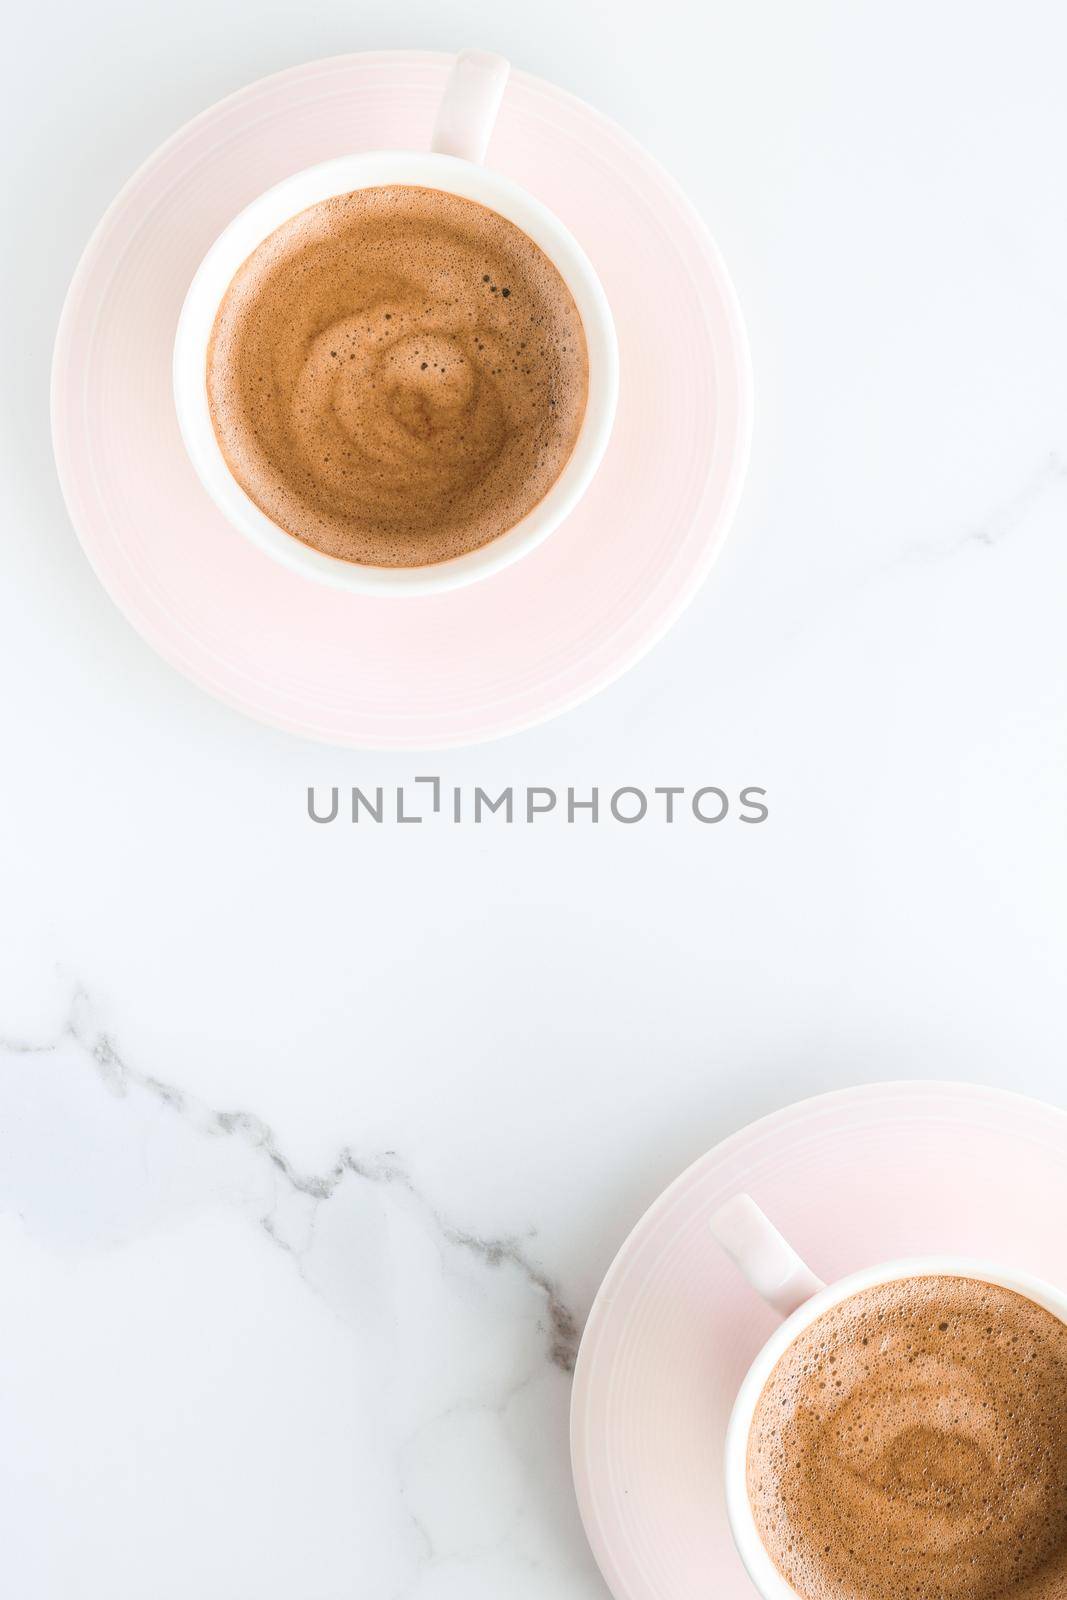 Breakfast, drinks and modern lifestyle concept - Hot aromatic coffee on marble, flatlay